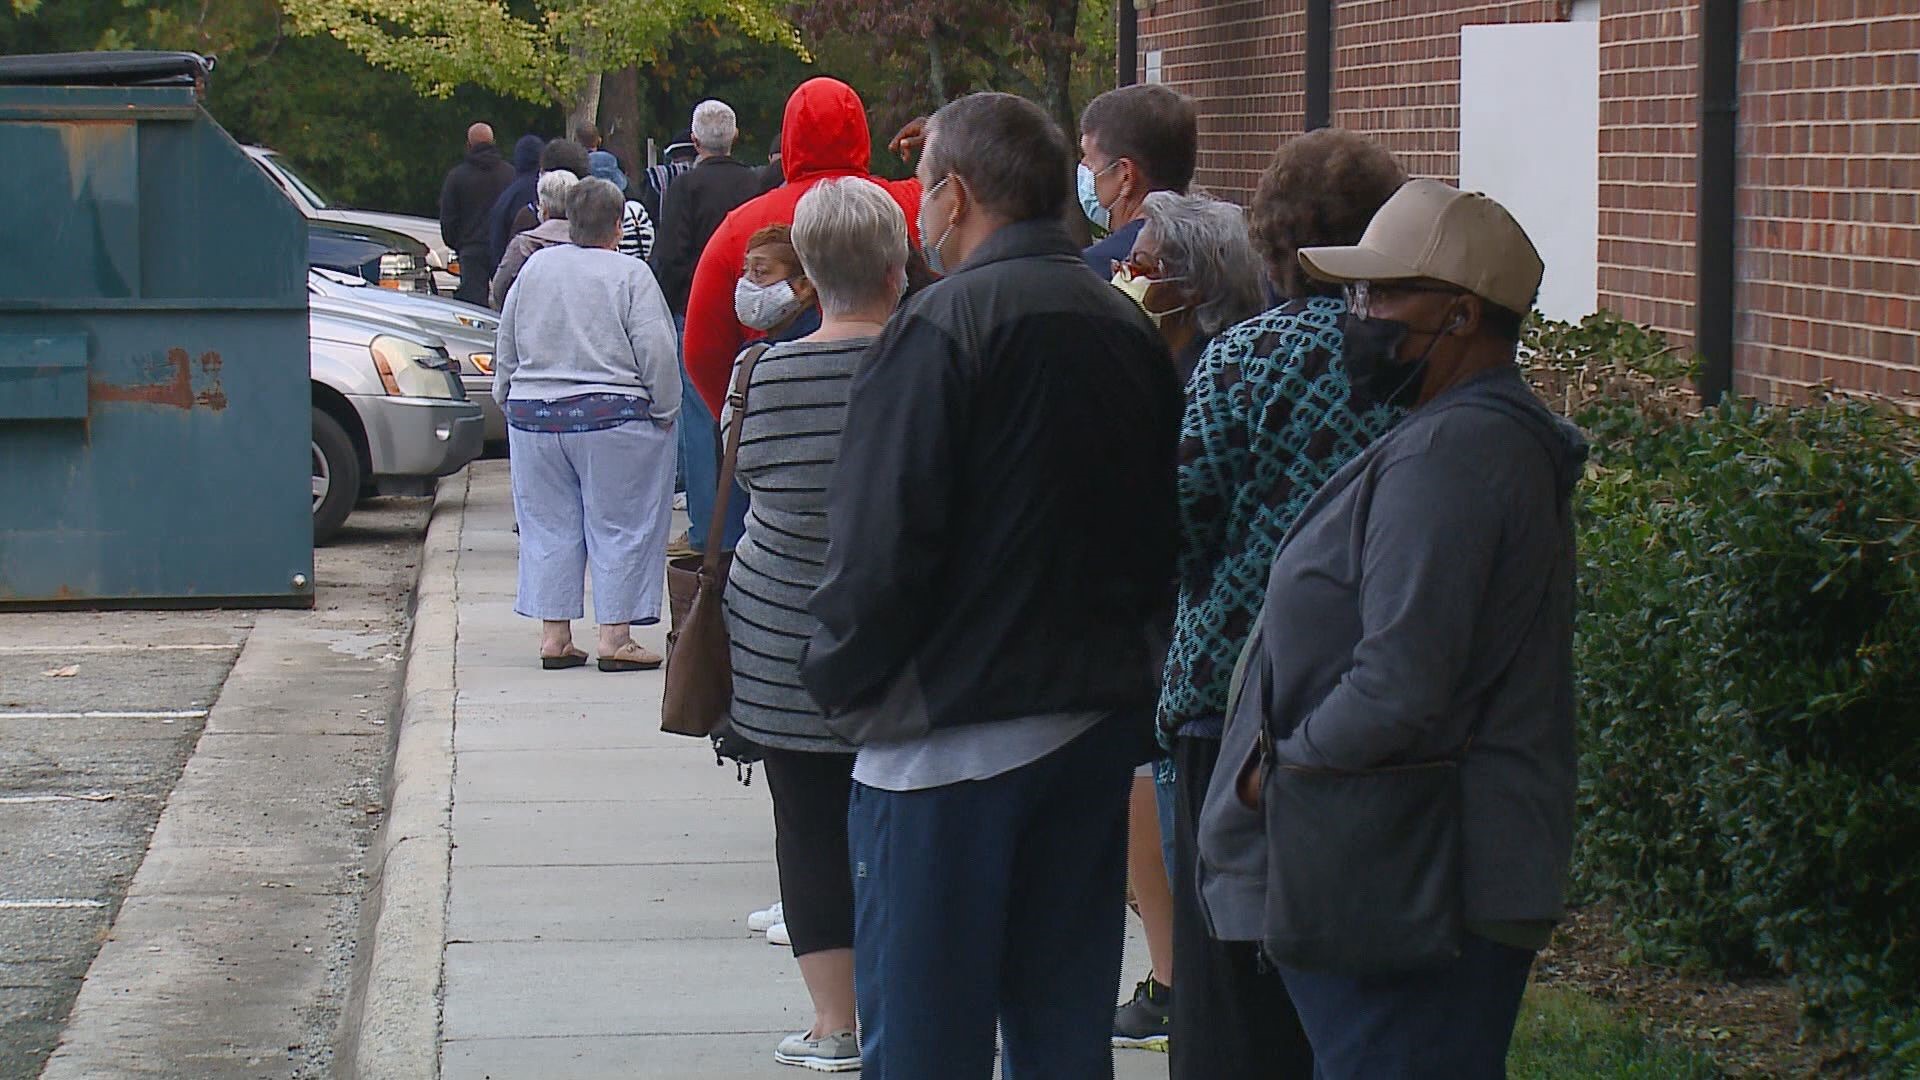 The State Board of Elections reported 272,000 people voted in-person on the first day of early voting in North Carolina. Many people had to wait in line.